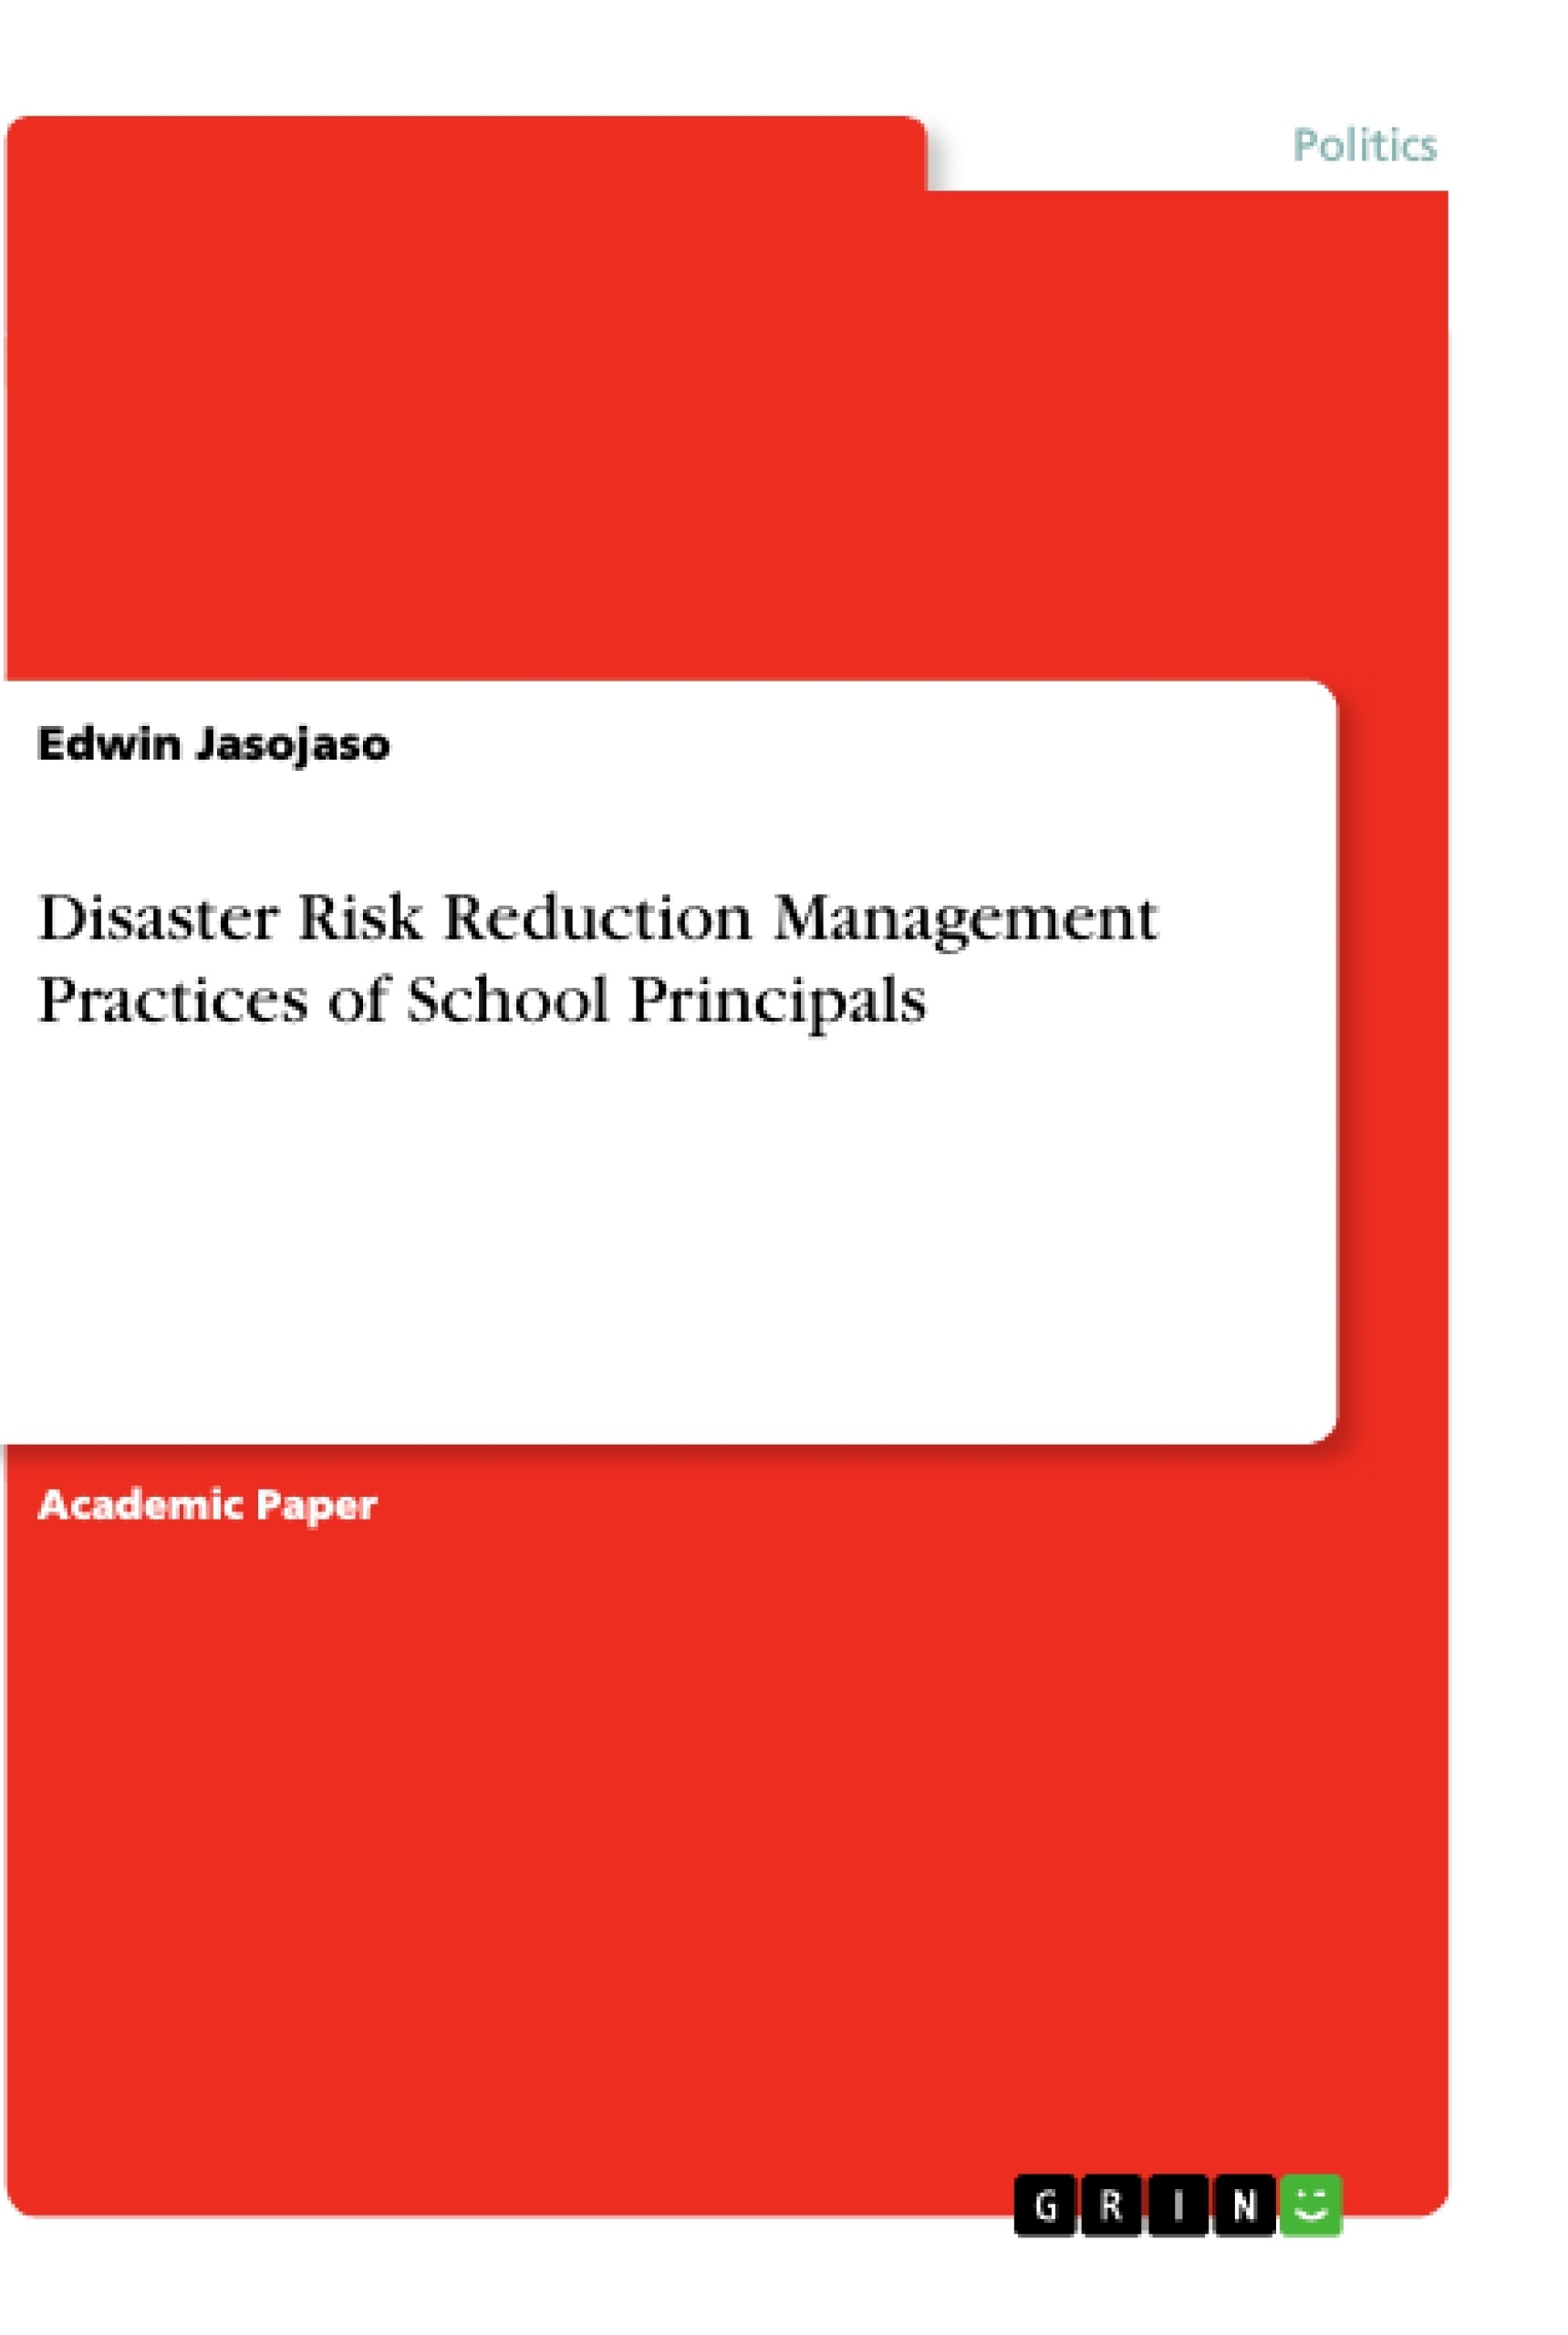 Title: Disaster Risk Reduction Management Practices of School Principals